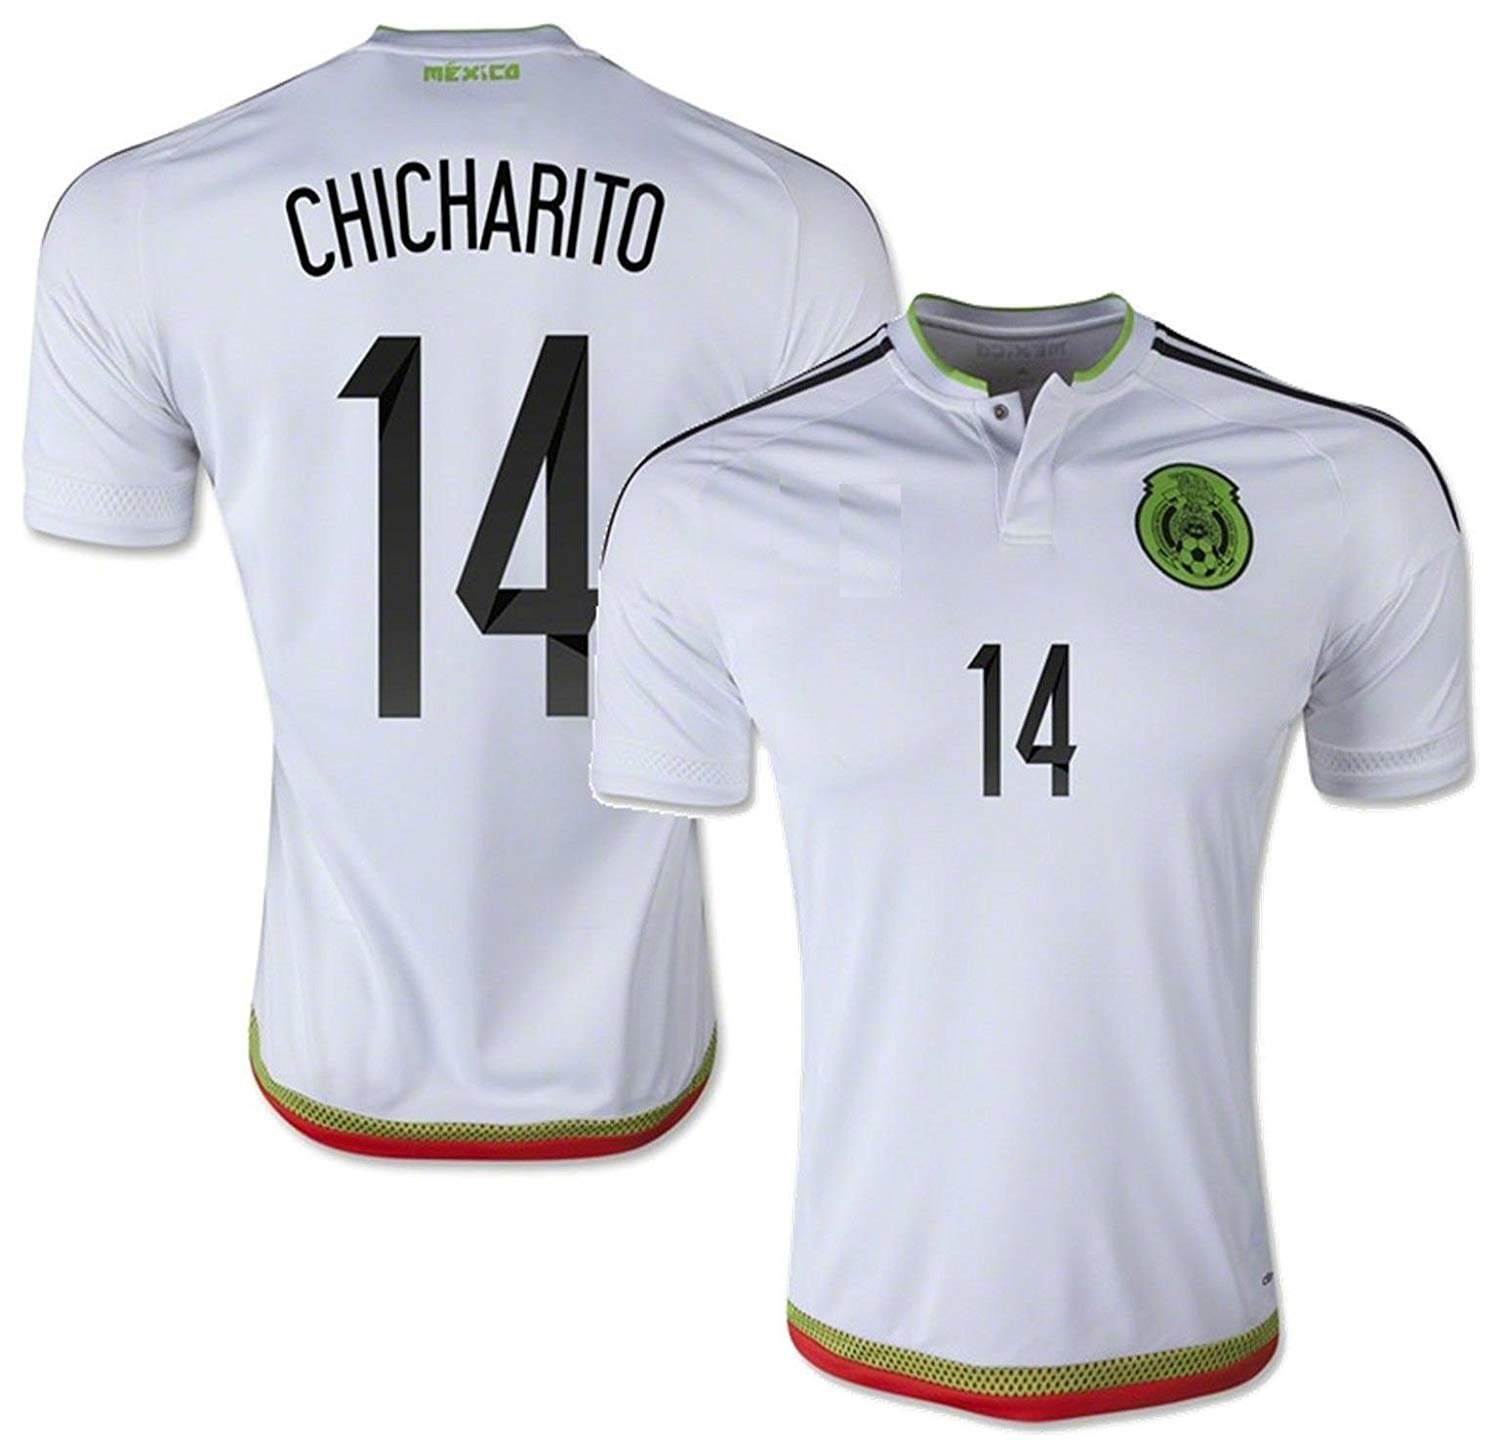 iSport Gifts Mexico Chicharito #14 Kids Soccer Ball ✓ Size 5 for Kids & Adult... 